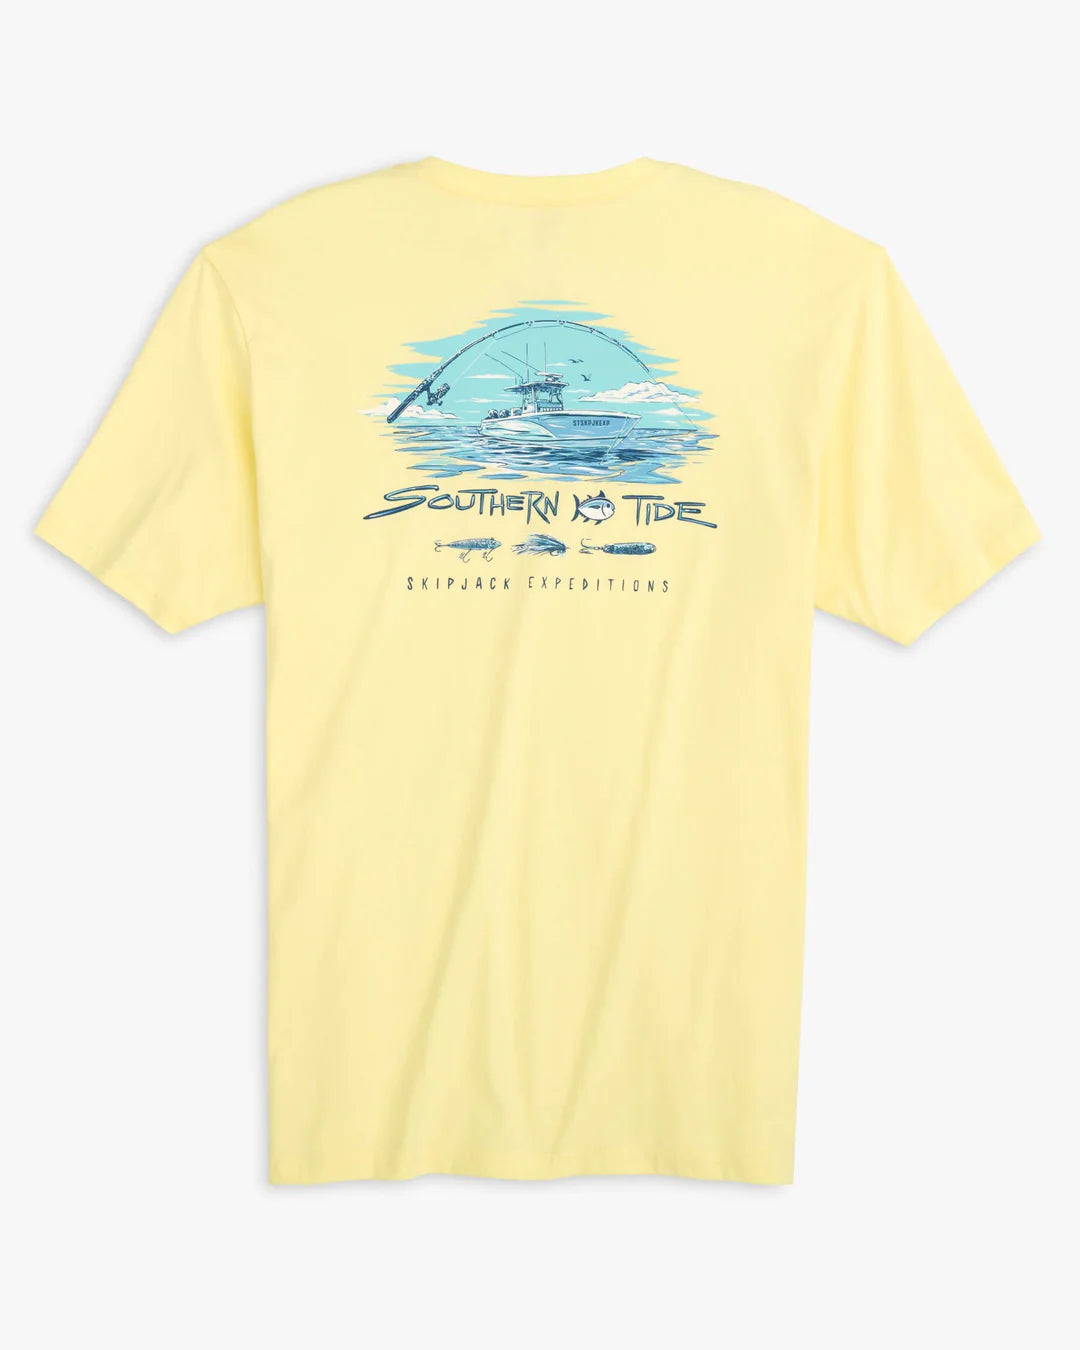 Southern Tide Men's Short Sleeve Skip Jack Expeditions Tee, full back view.